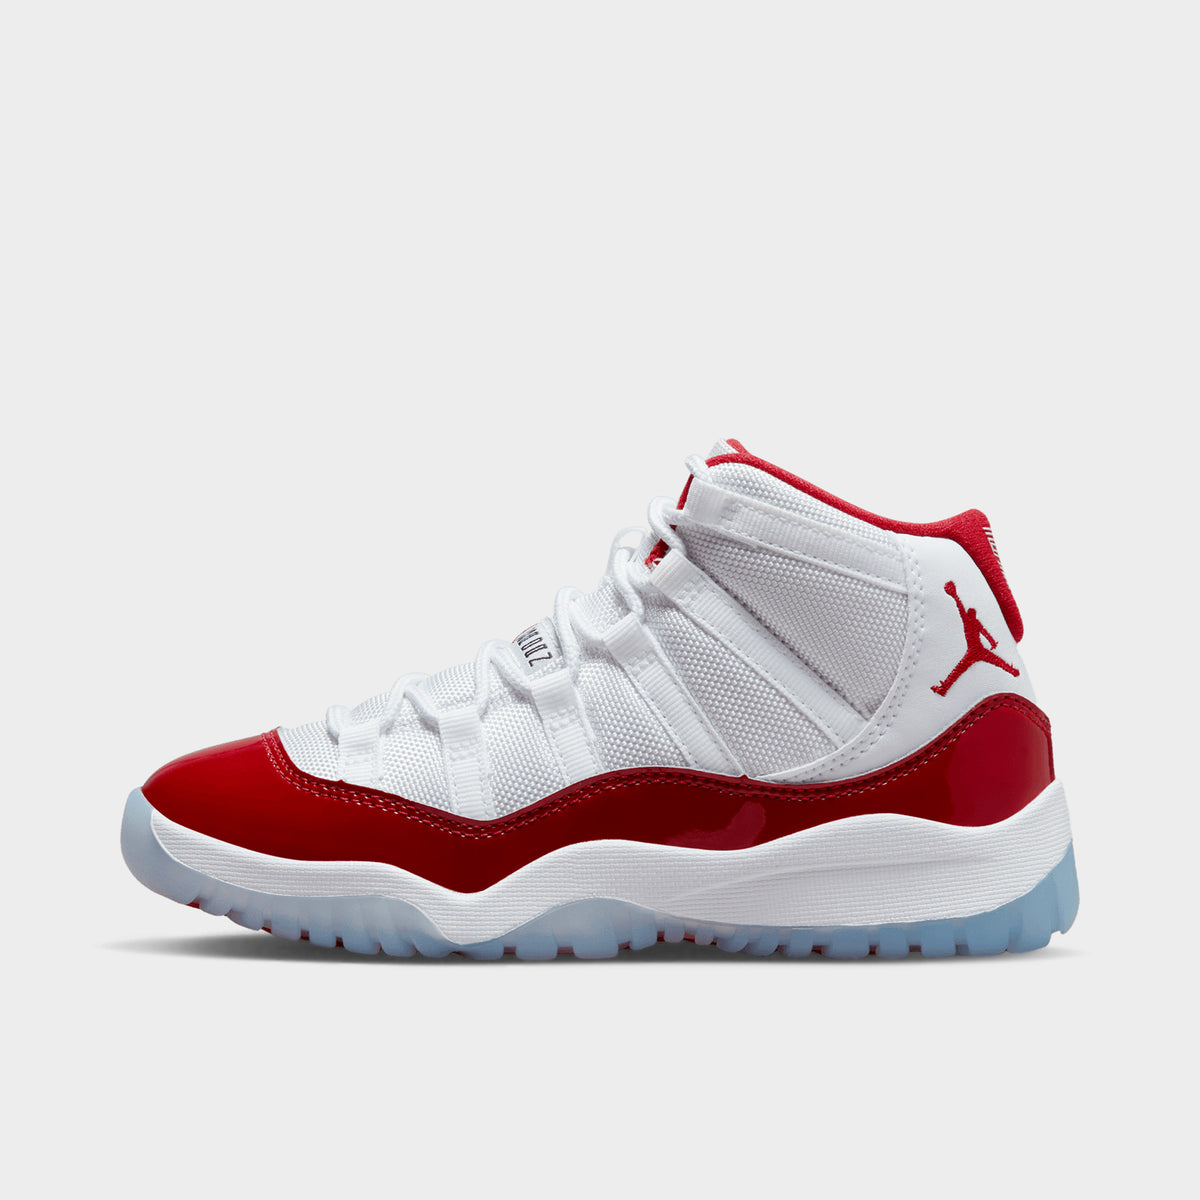 how much are the jordan 11 retro